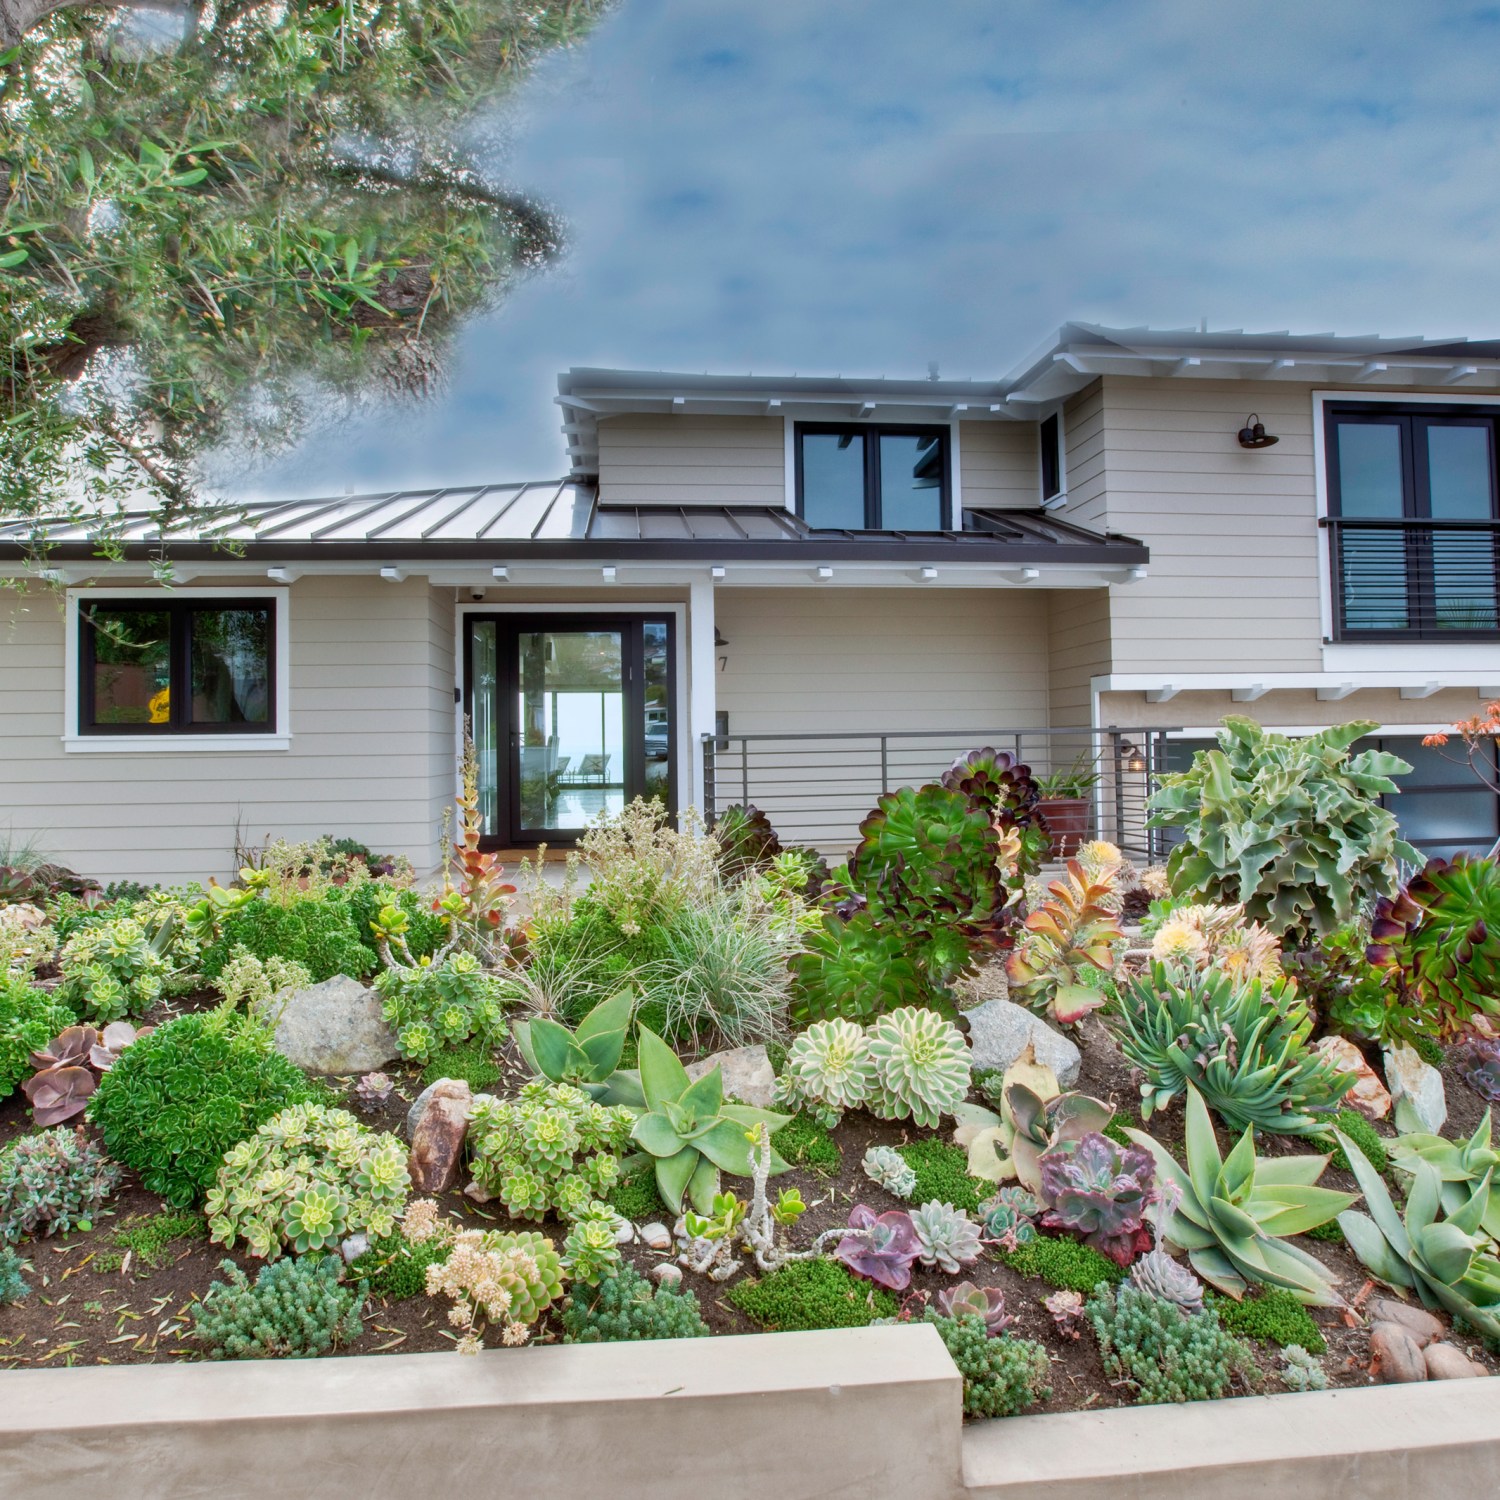 Drought-tolerant plants in a front yard